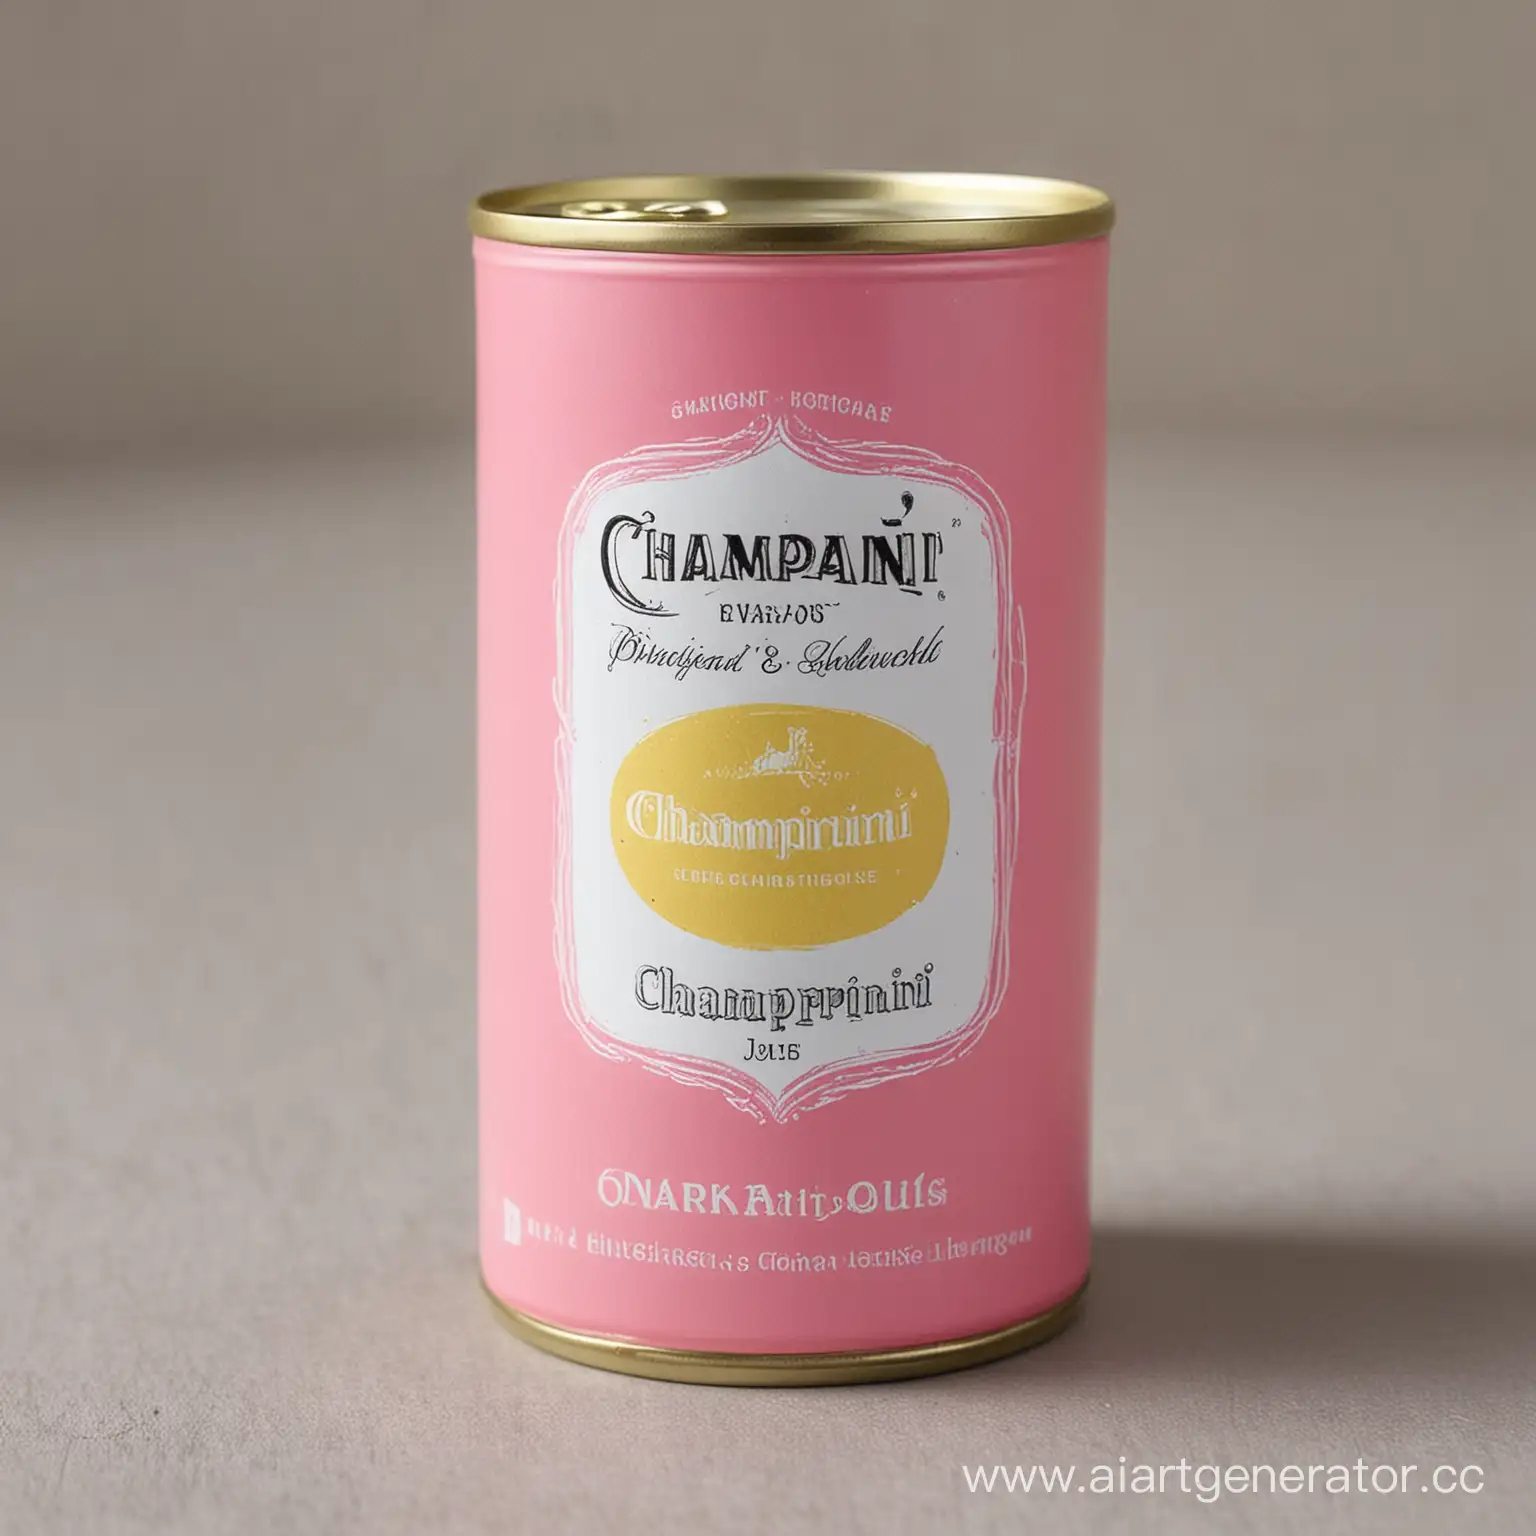 Luxury-Champagne-in-Portable-045-Litre-Tin-Can-Elegant-CHAMPARINI-Branding-in-Pink-and-Yellow